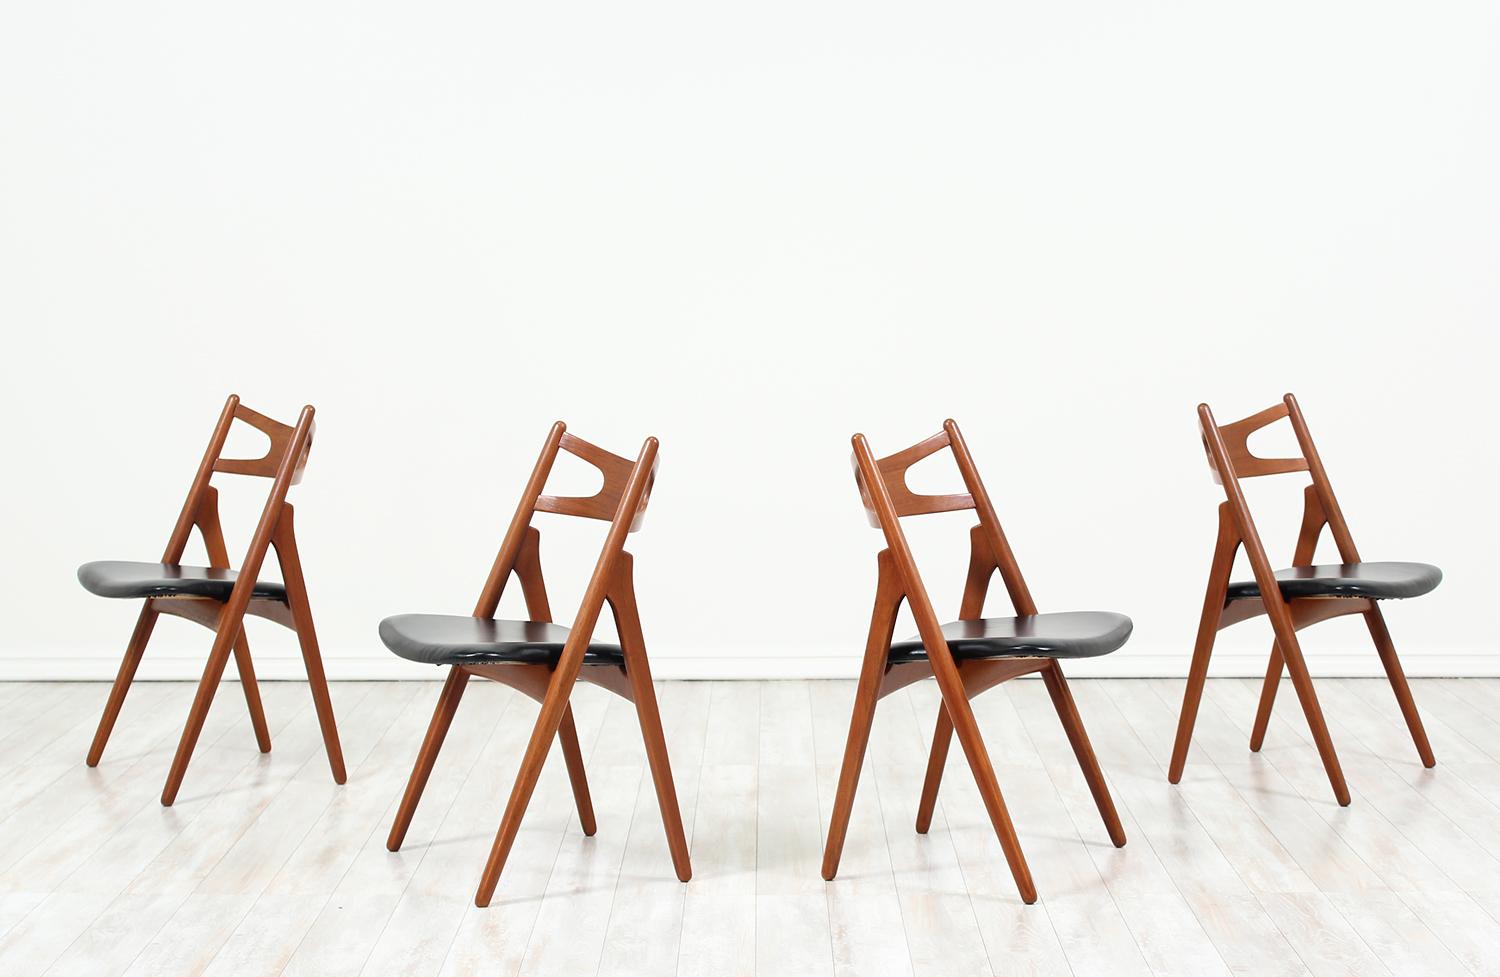 Set of four iconic “Sawbuck” CH-29 dining chairs designed by Hans J. Wegner for Carl Hansen & Søn in Denmark in 1952. This chair is defined by its A-shaped frame which can be seen from the profile view. This set is sturdily but simply constructed in